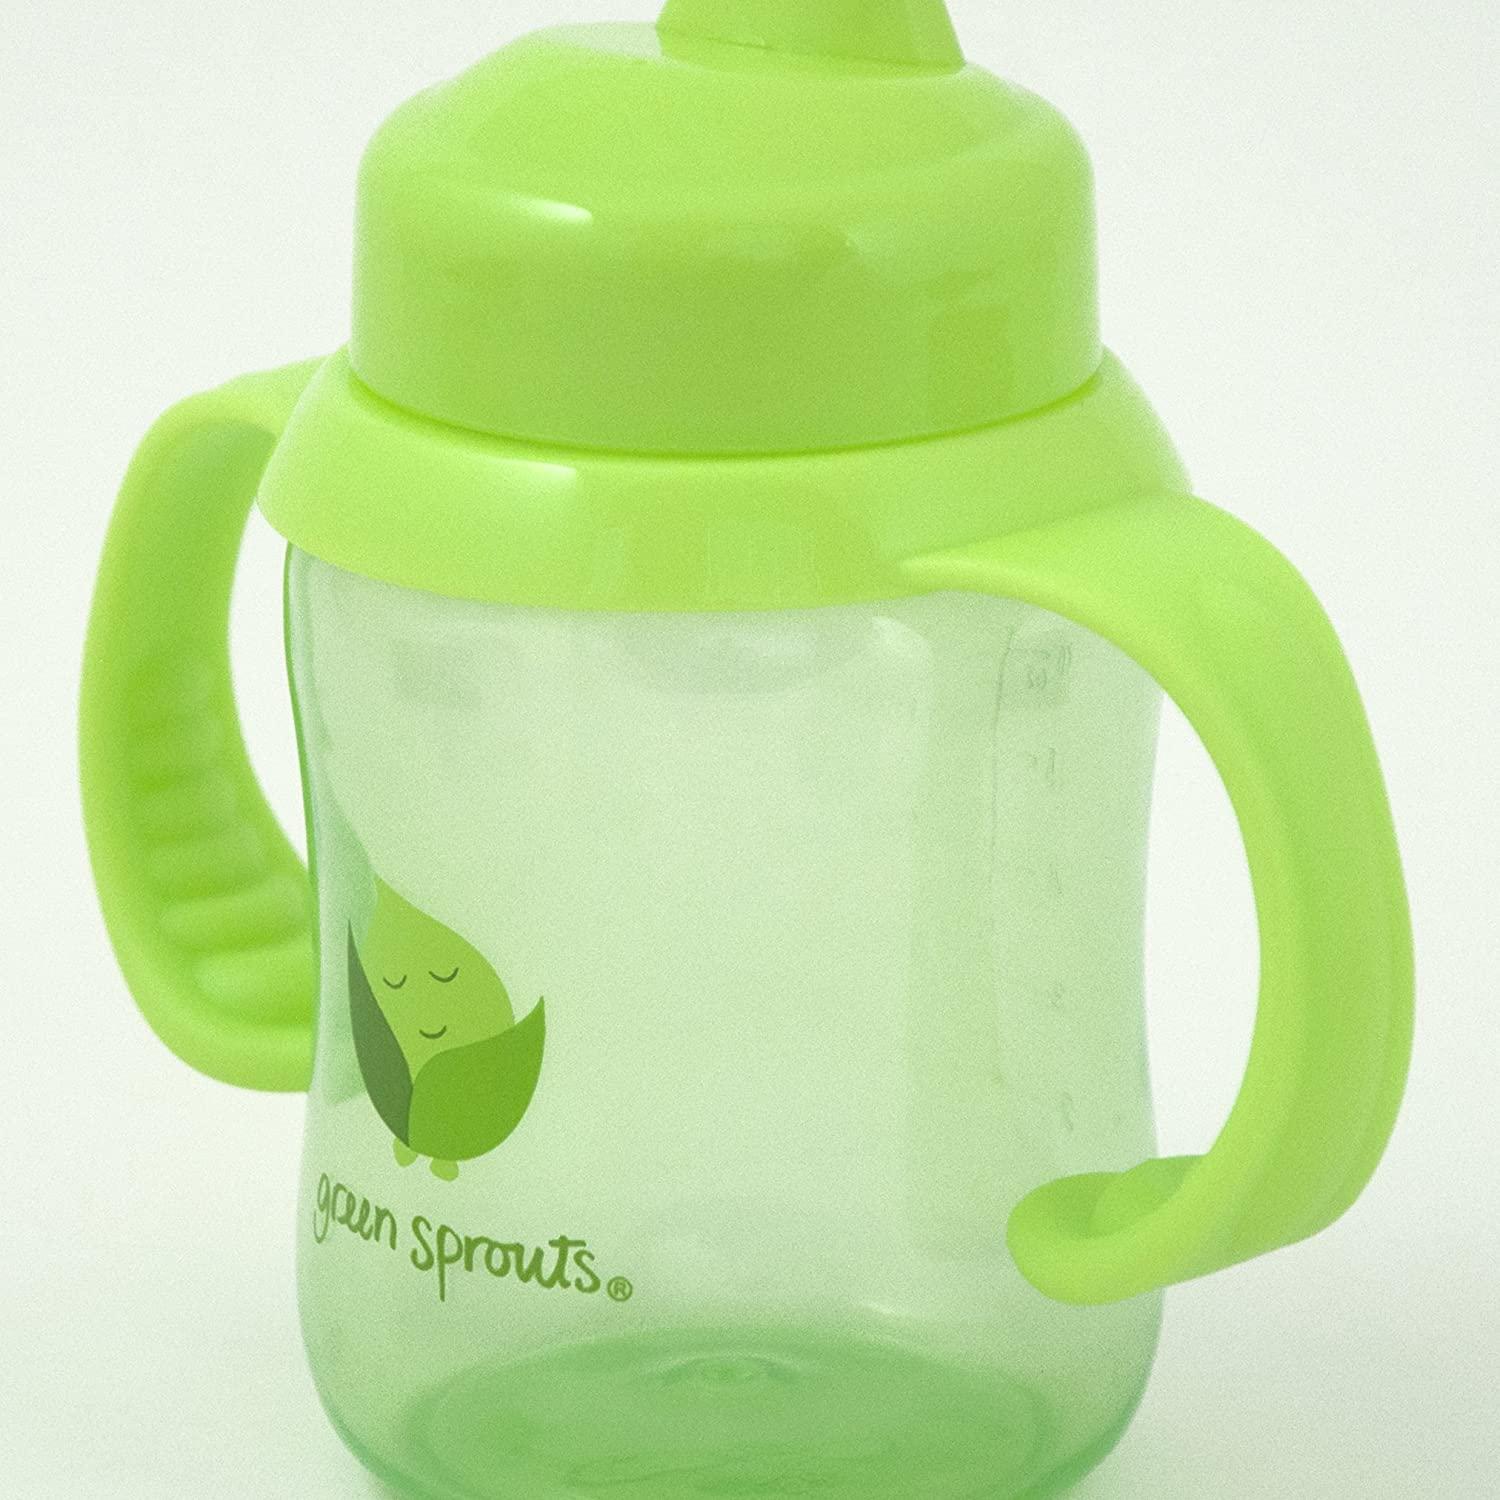 The First Years GreenGrown Reusable Spill-Proof Sippy Toddler Cups - Blue -  3pk/10oz